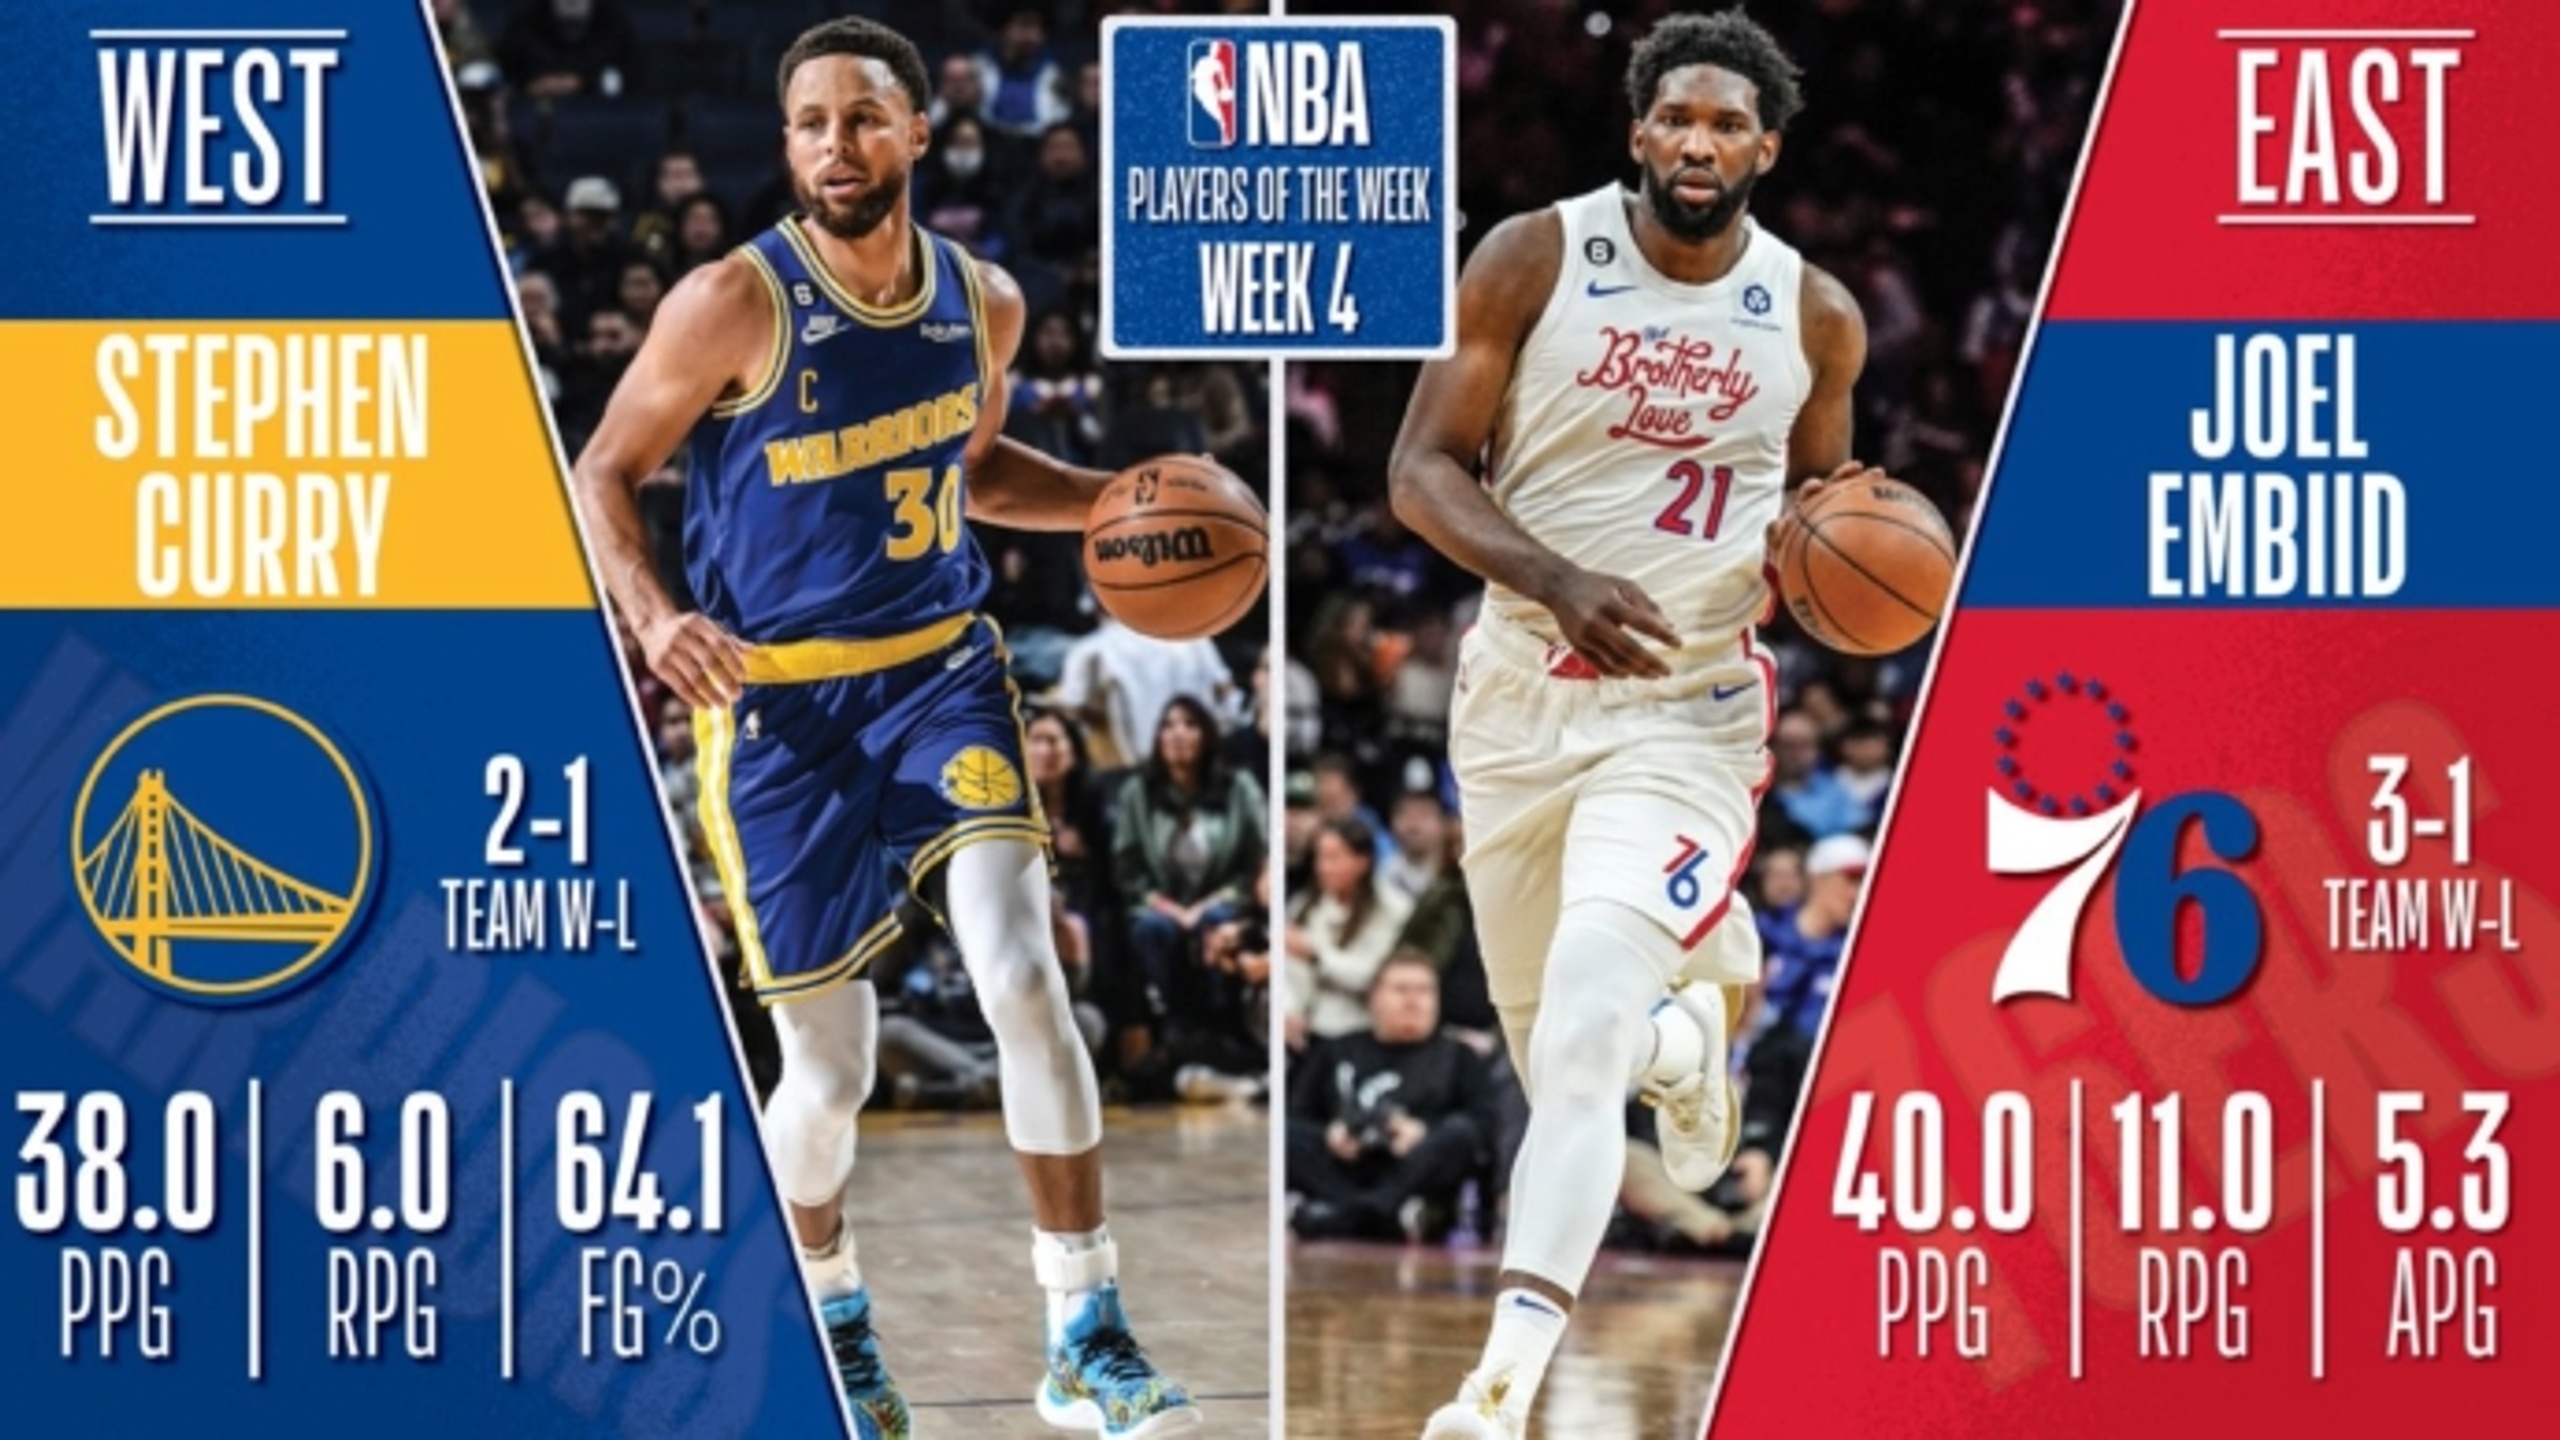 Stephen Curry, Joel Embiid named NBA Players of the Week